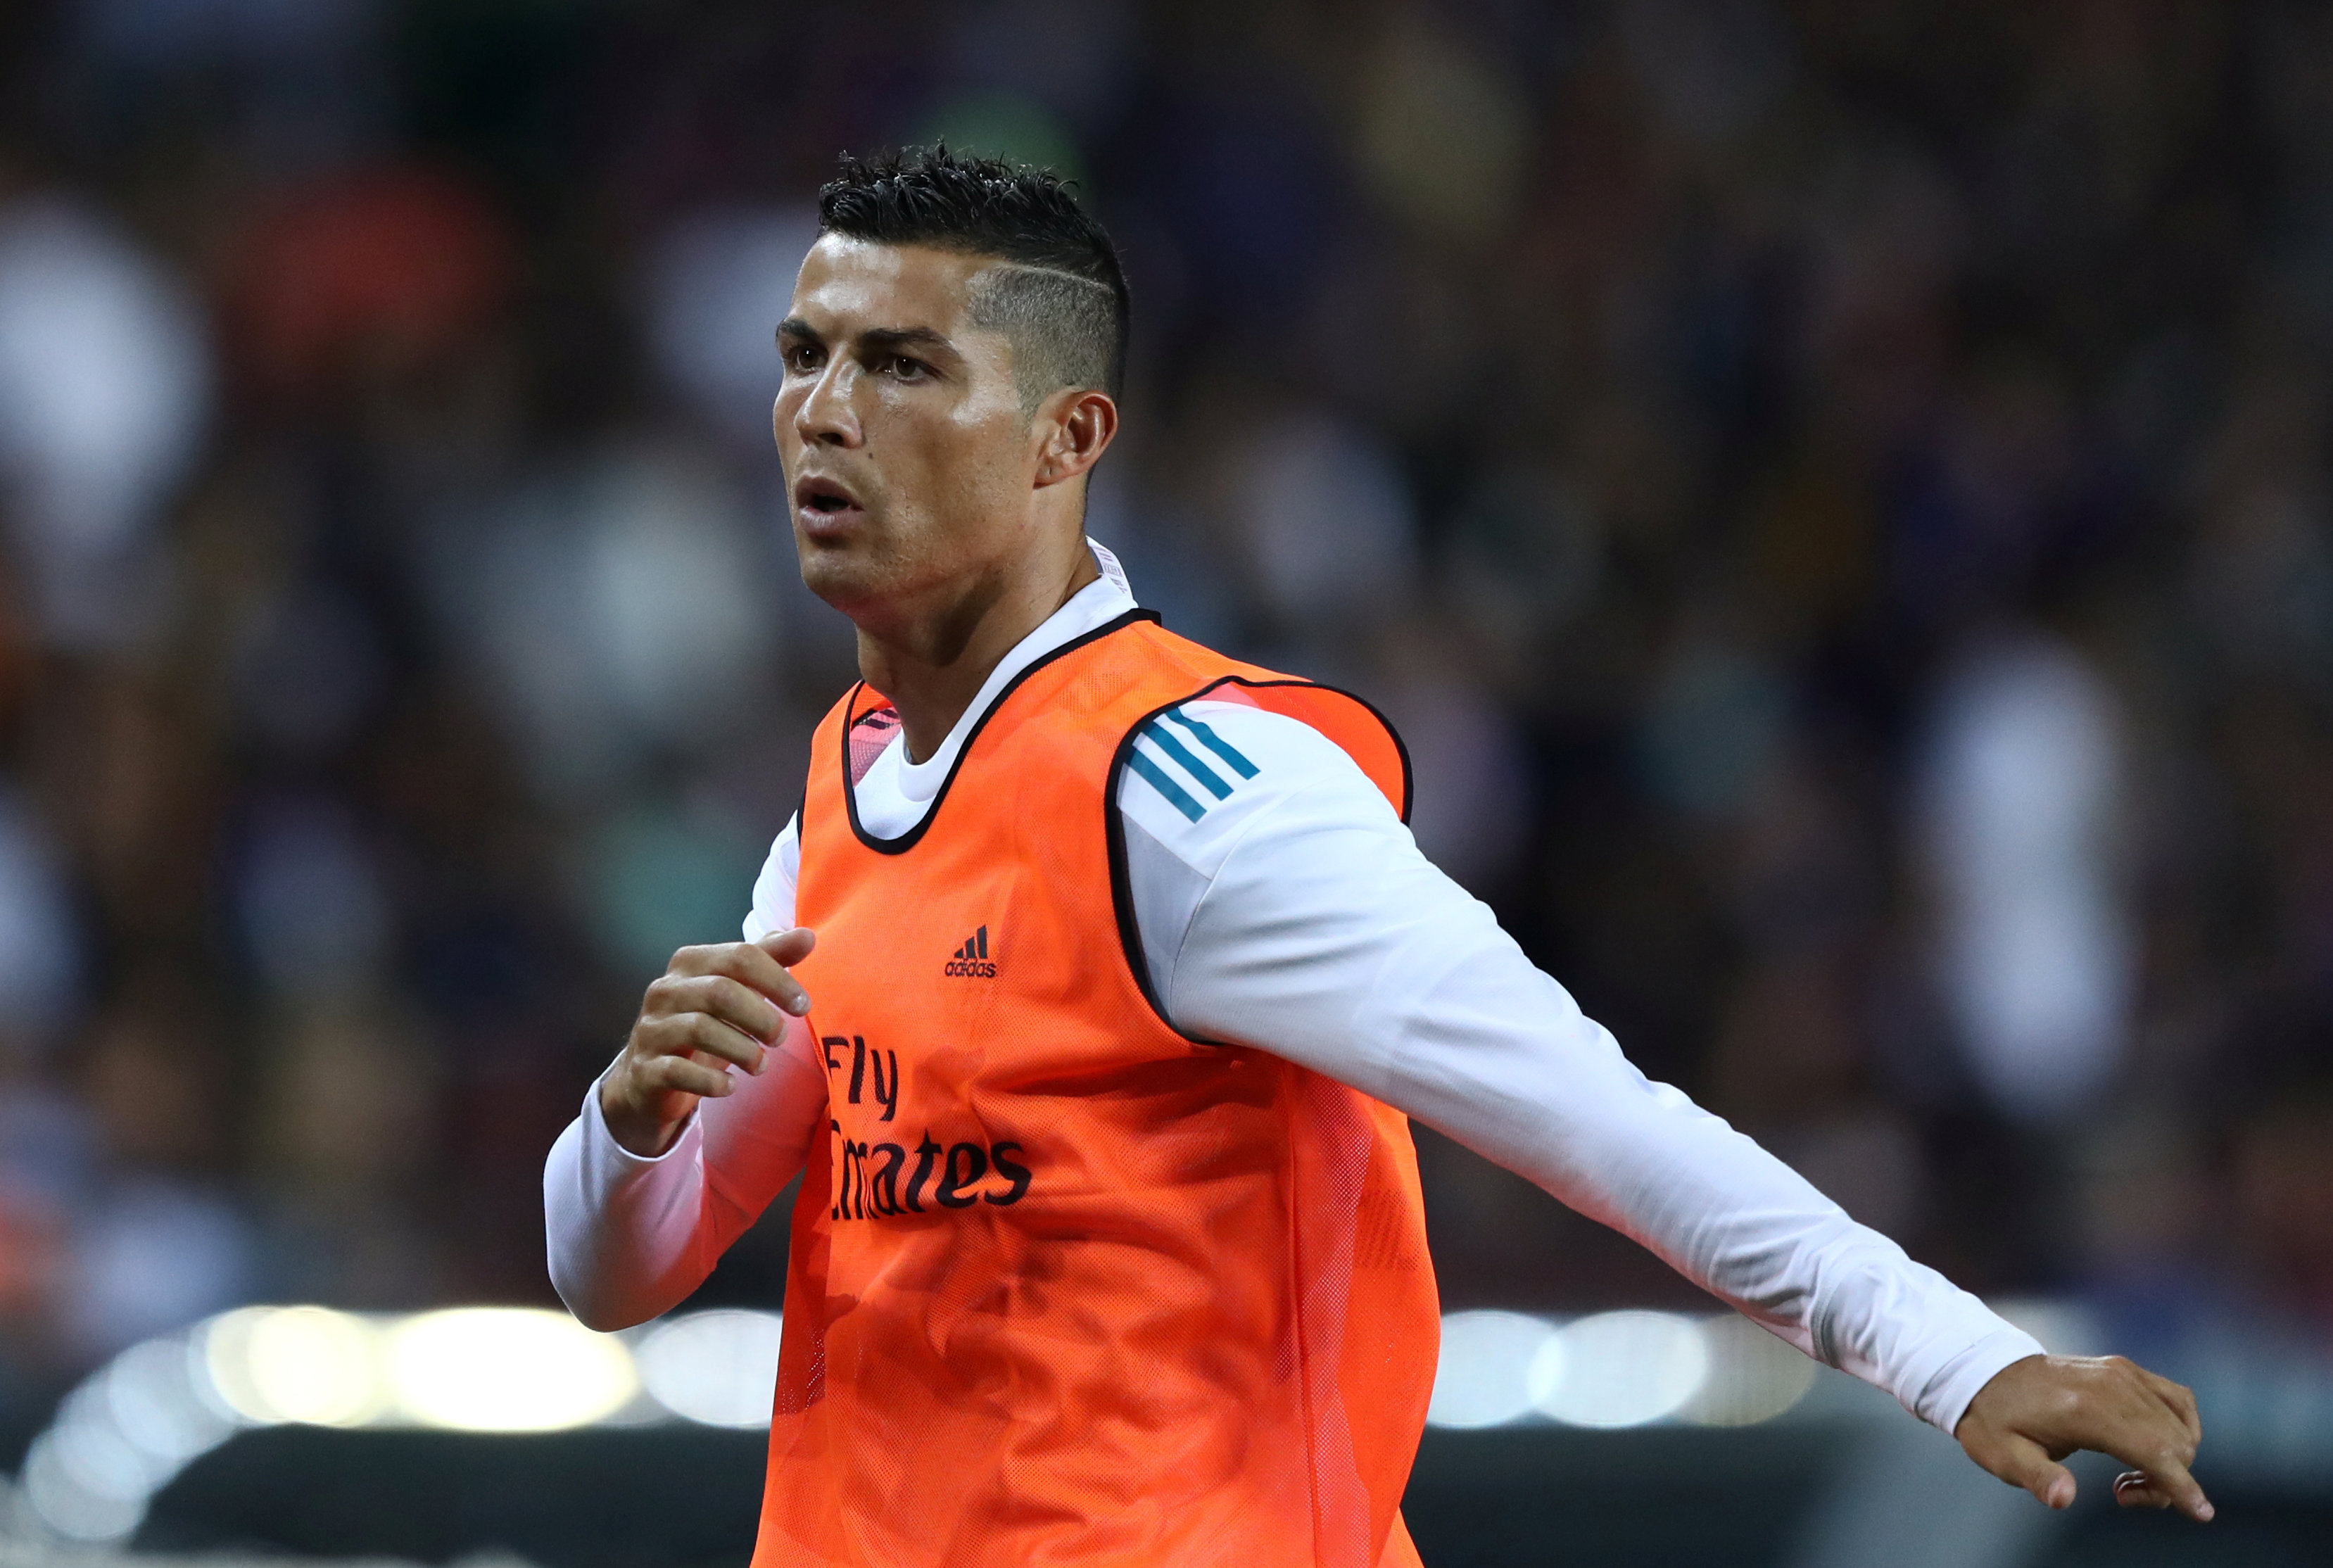 Football: Real's Ronaldo feels persecuted after ban appeal dismissed